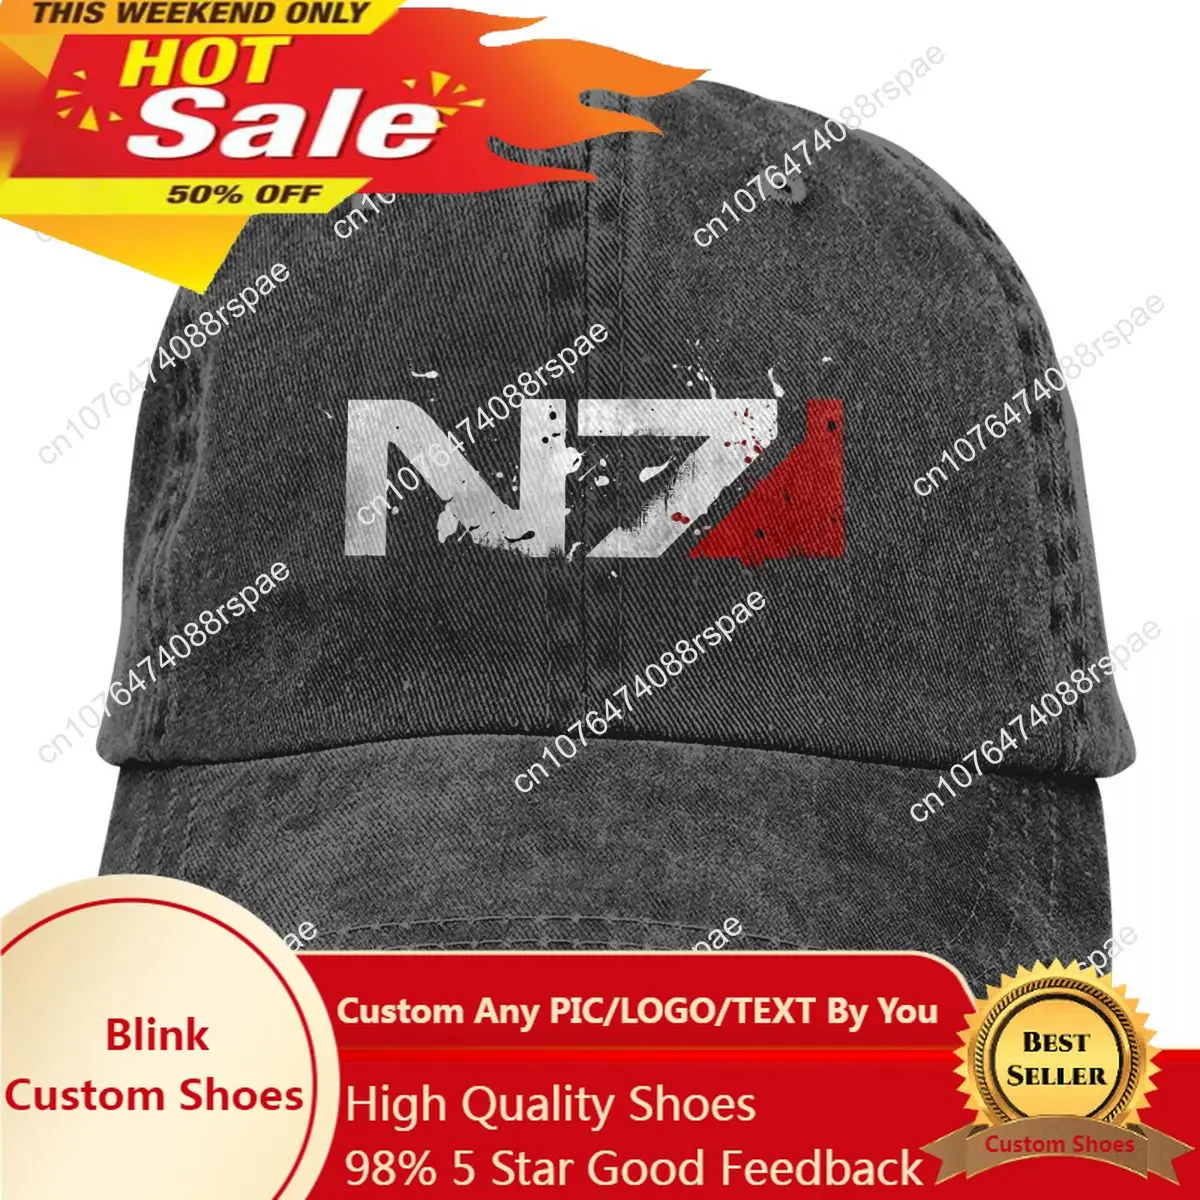 

Mass Effect Commander Shepard Game Multicolor Hat Peaked Women's Cap Distressed N7 Personalized Visor Protection Hats